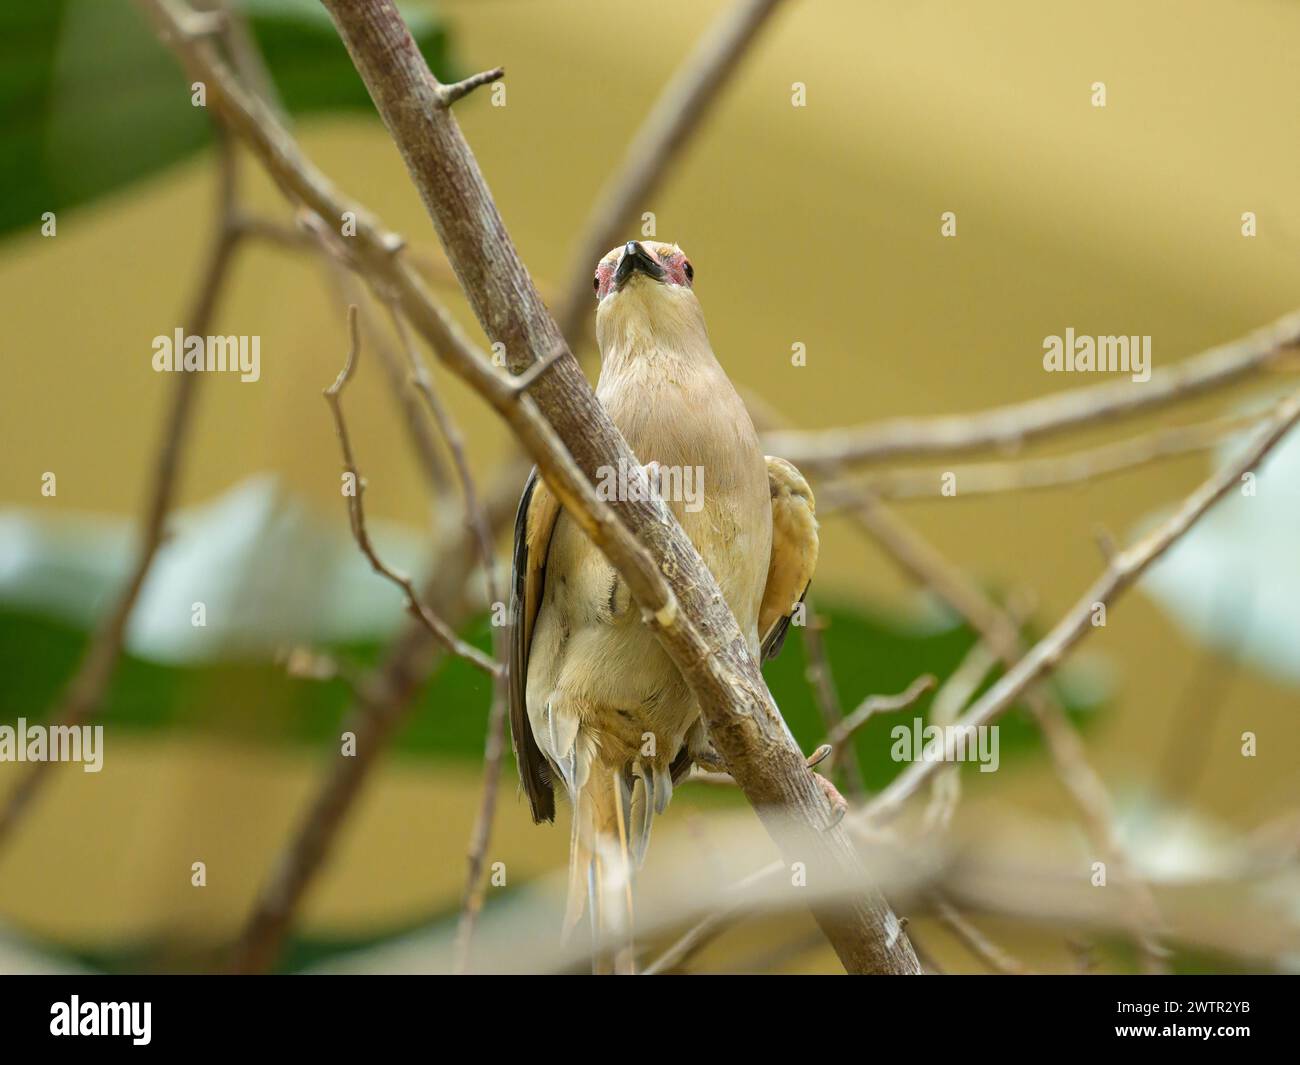 A blue naped Mousebird sitting on a branch in a zoo Austria Stock Photo